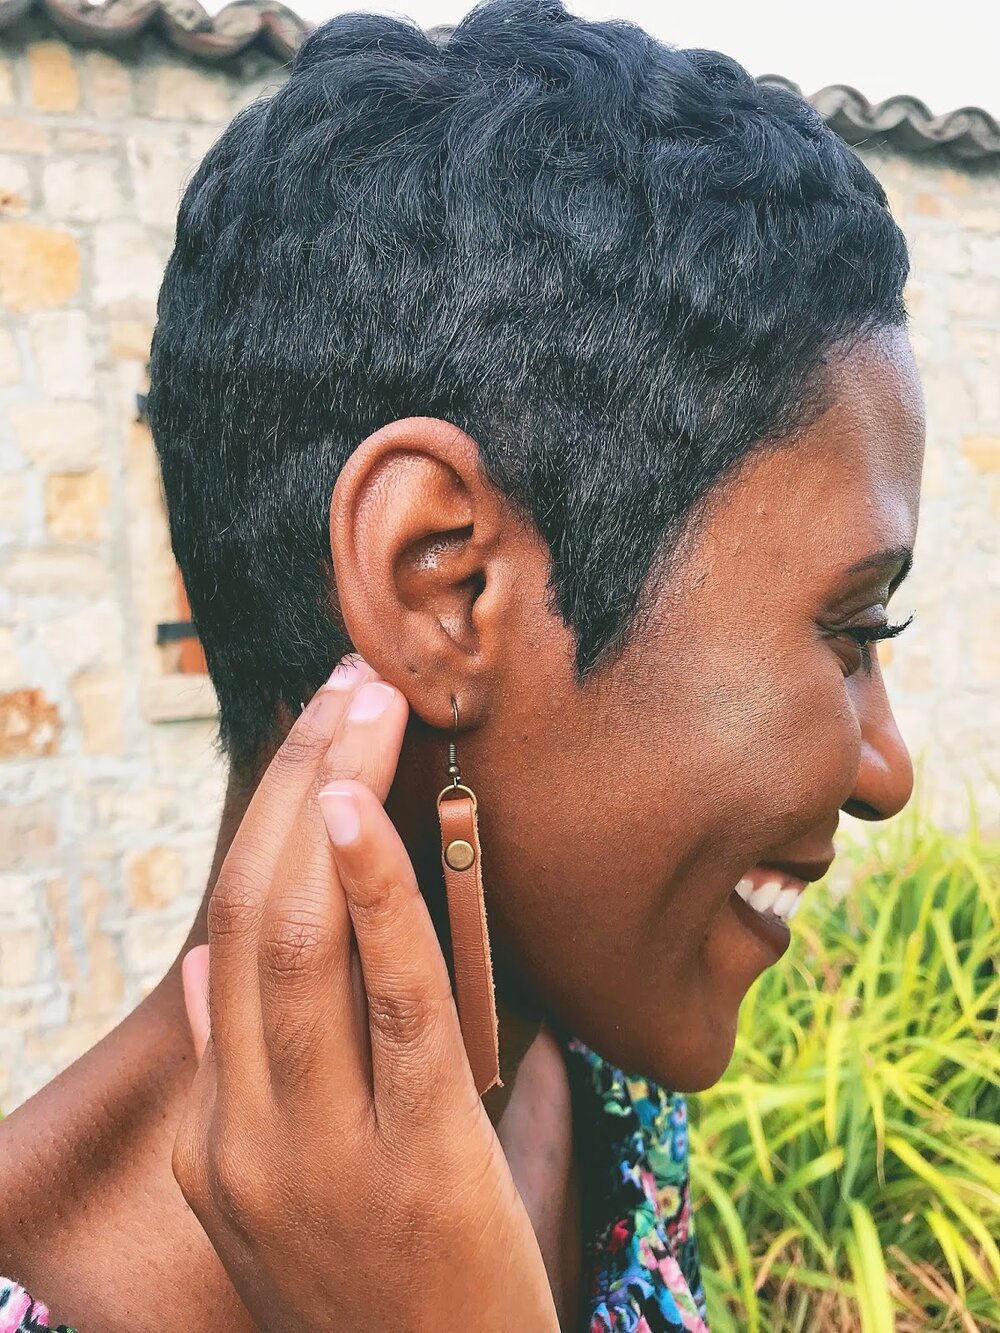 The Cutest Earrings That Make My Pixie Cut Stand Out